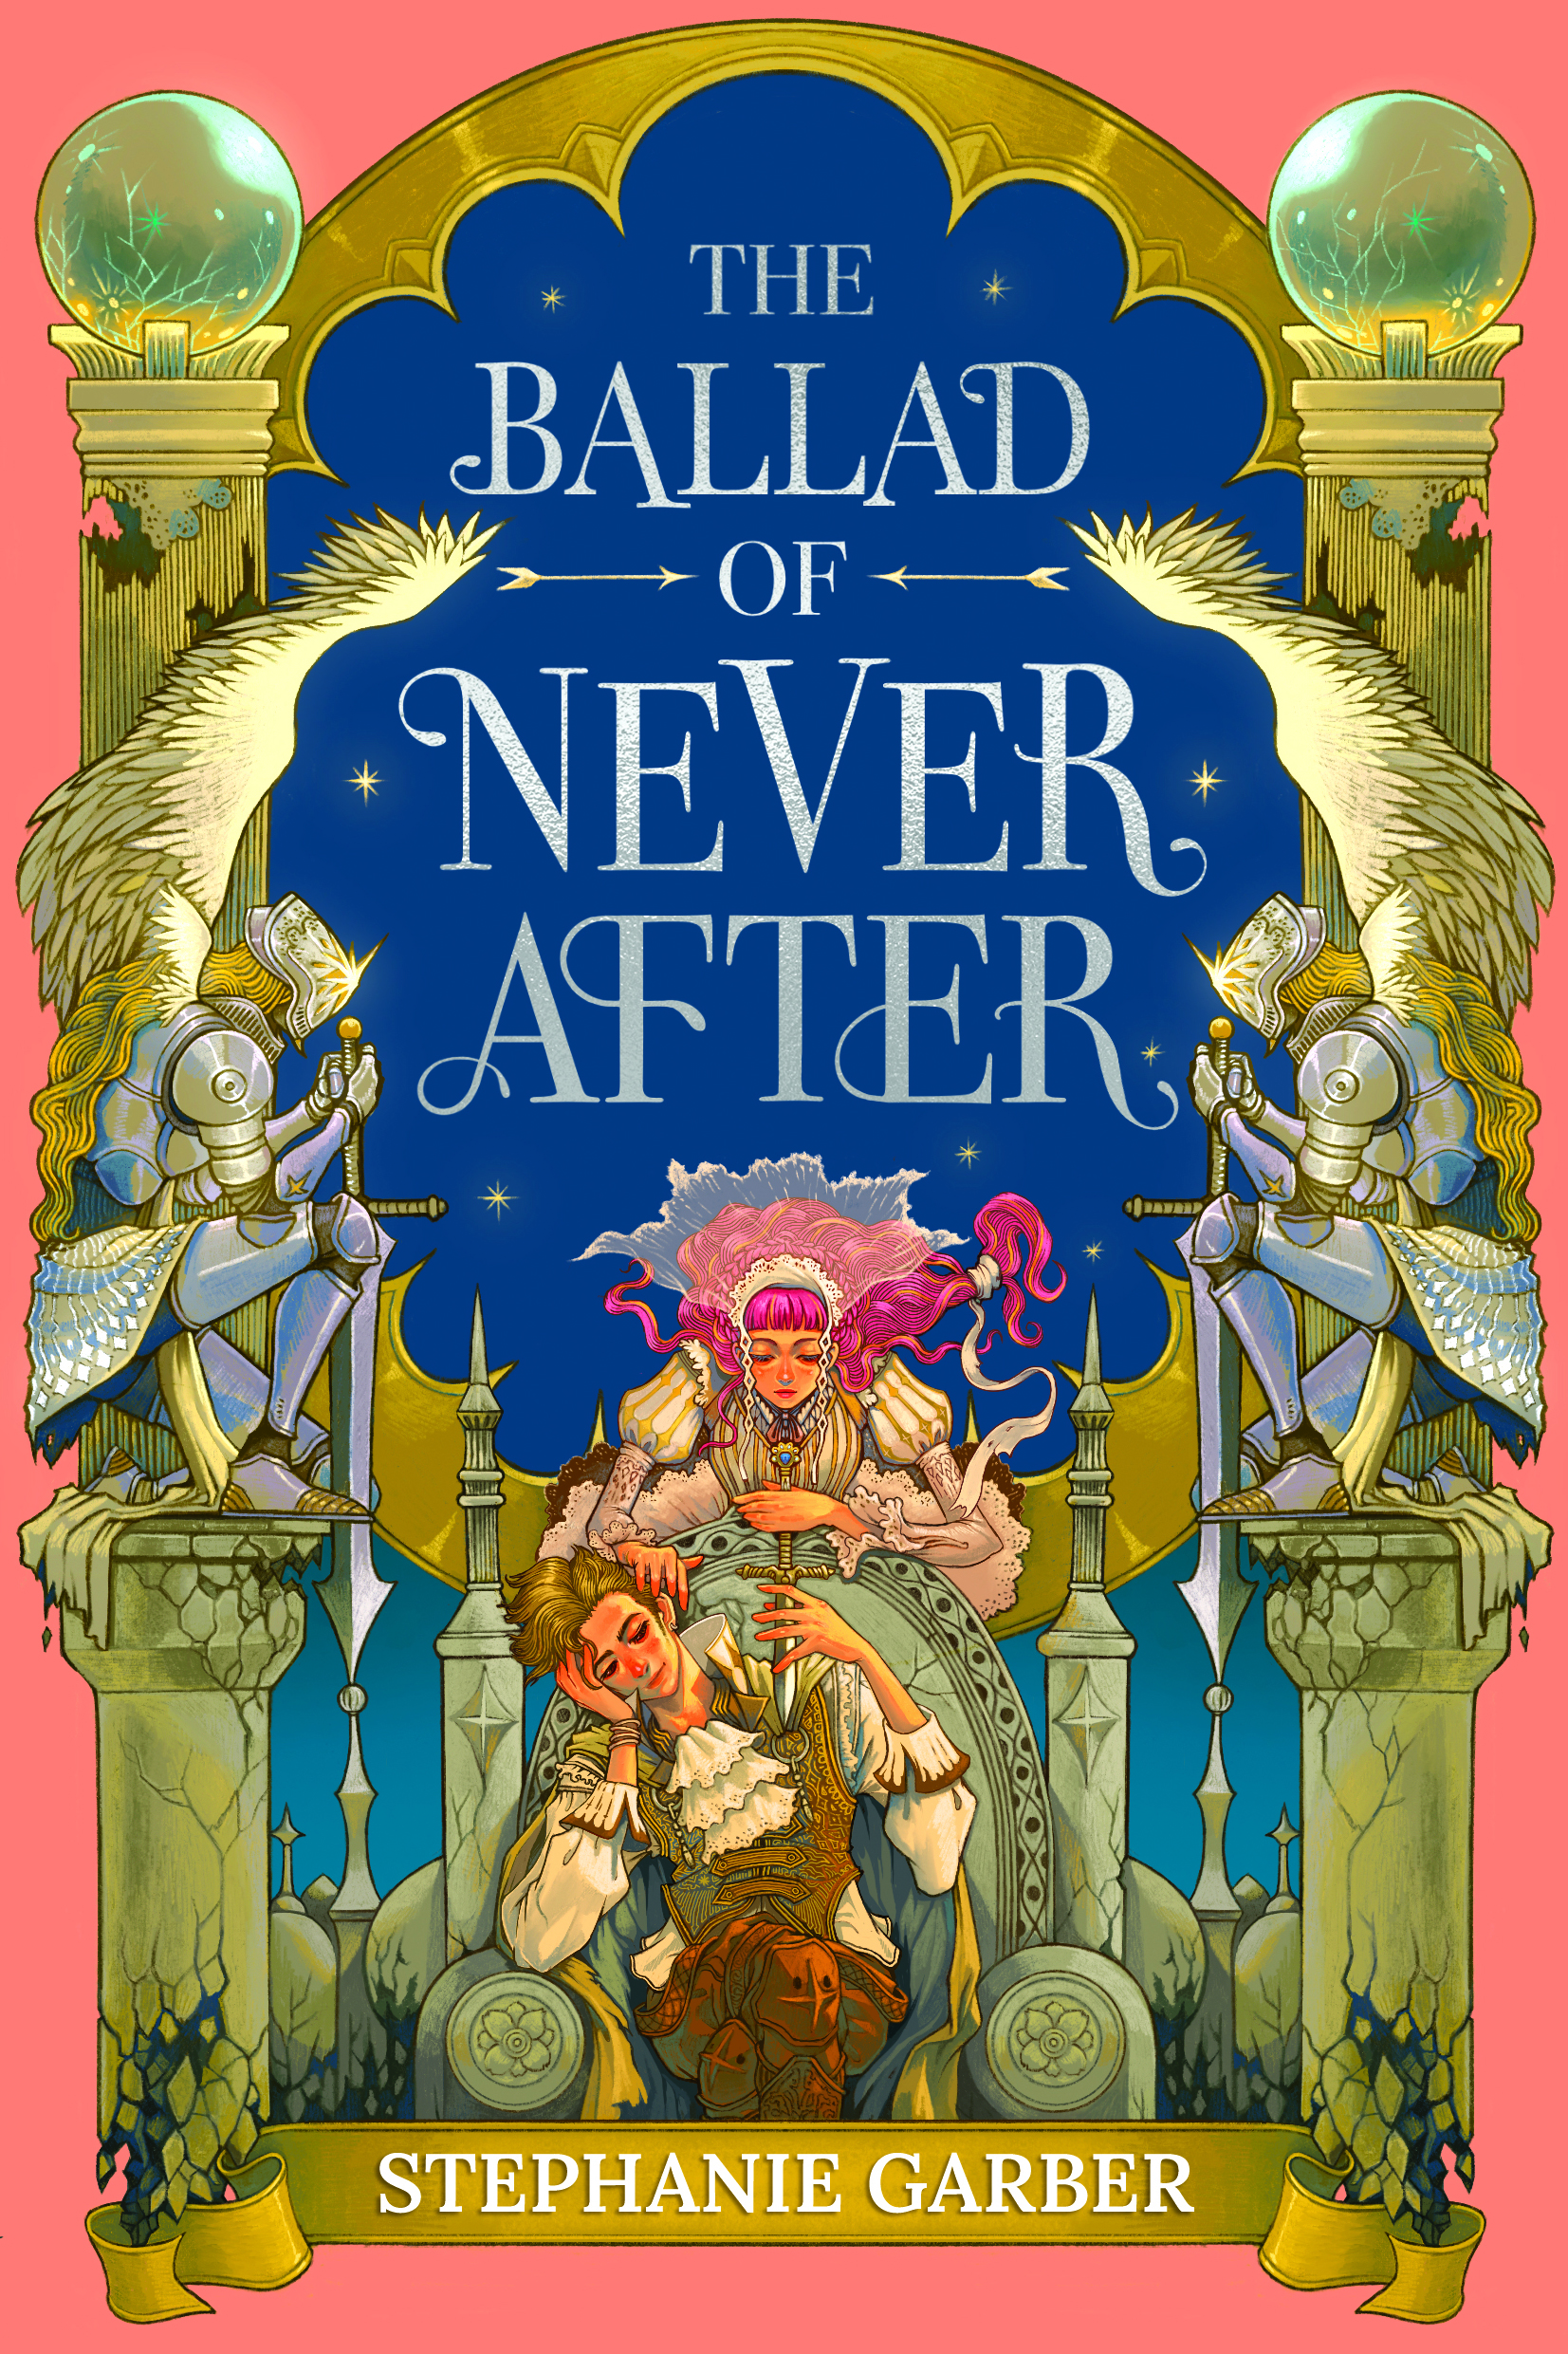 THE BALLAD OF NEVER AFTER